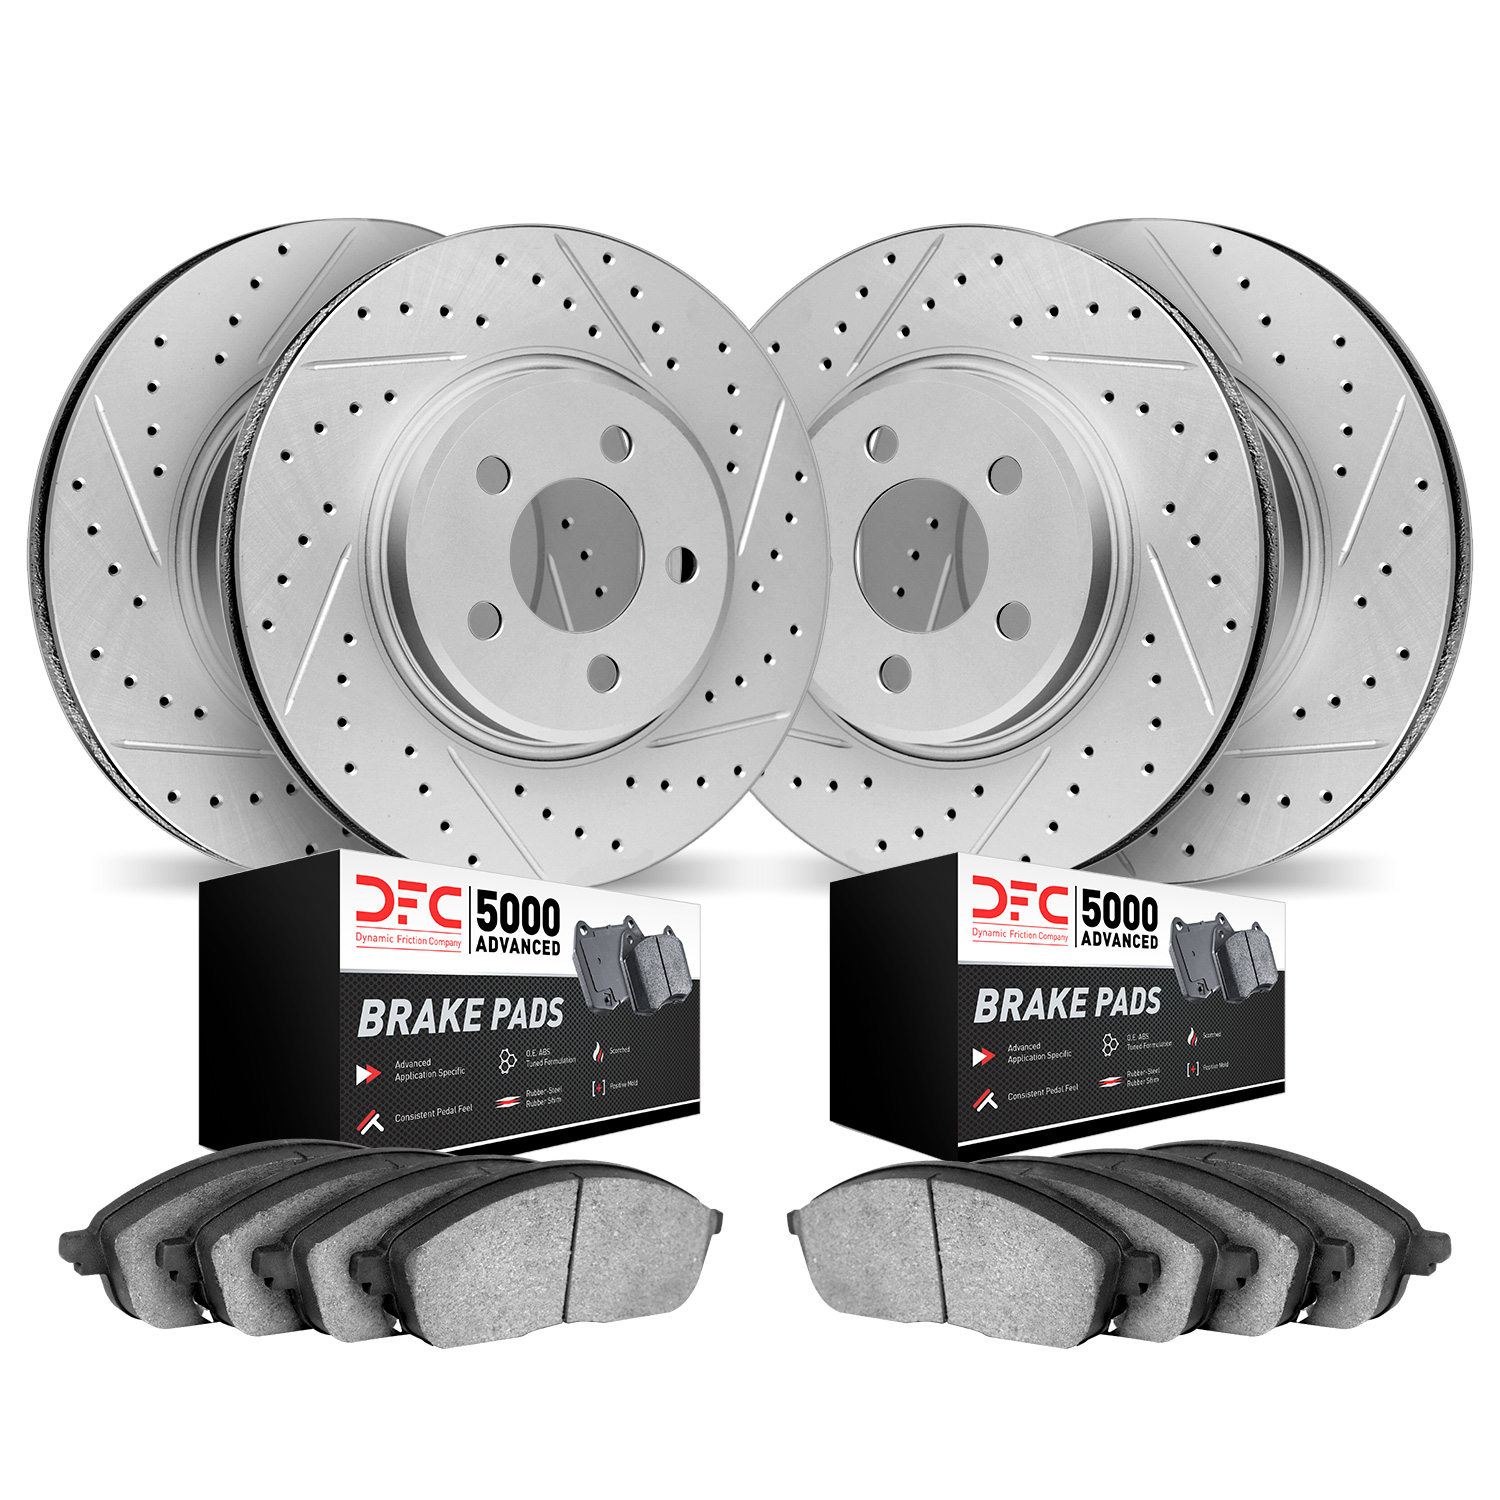 2504-27009 Geoperformance Drilled/Slotted Rotors w/5000 Advanced Brake Pads Kit, 2007-2015 Volvo, Position: Front and Rear